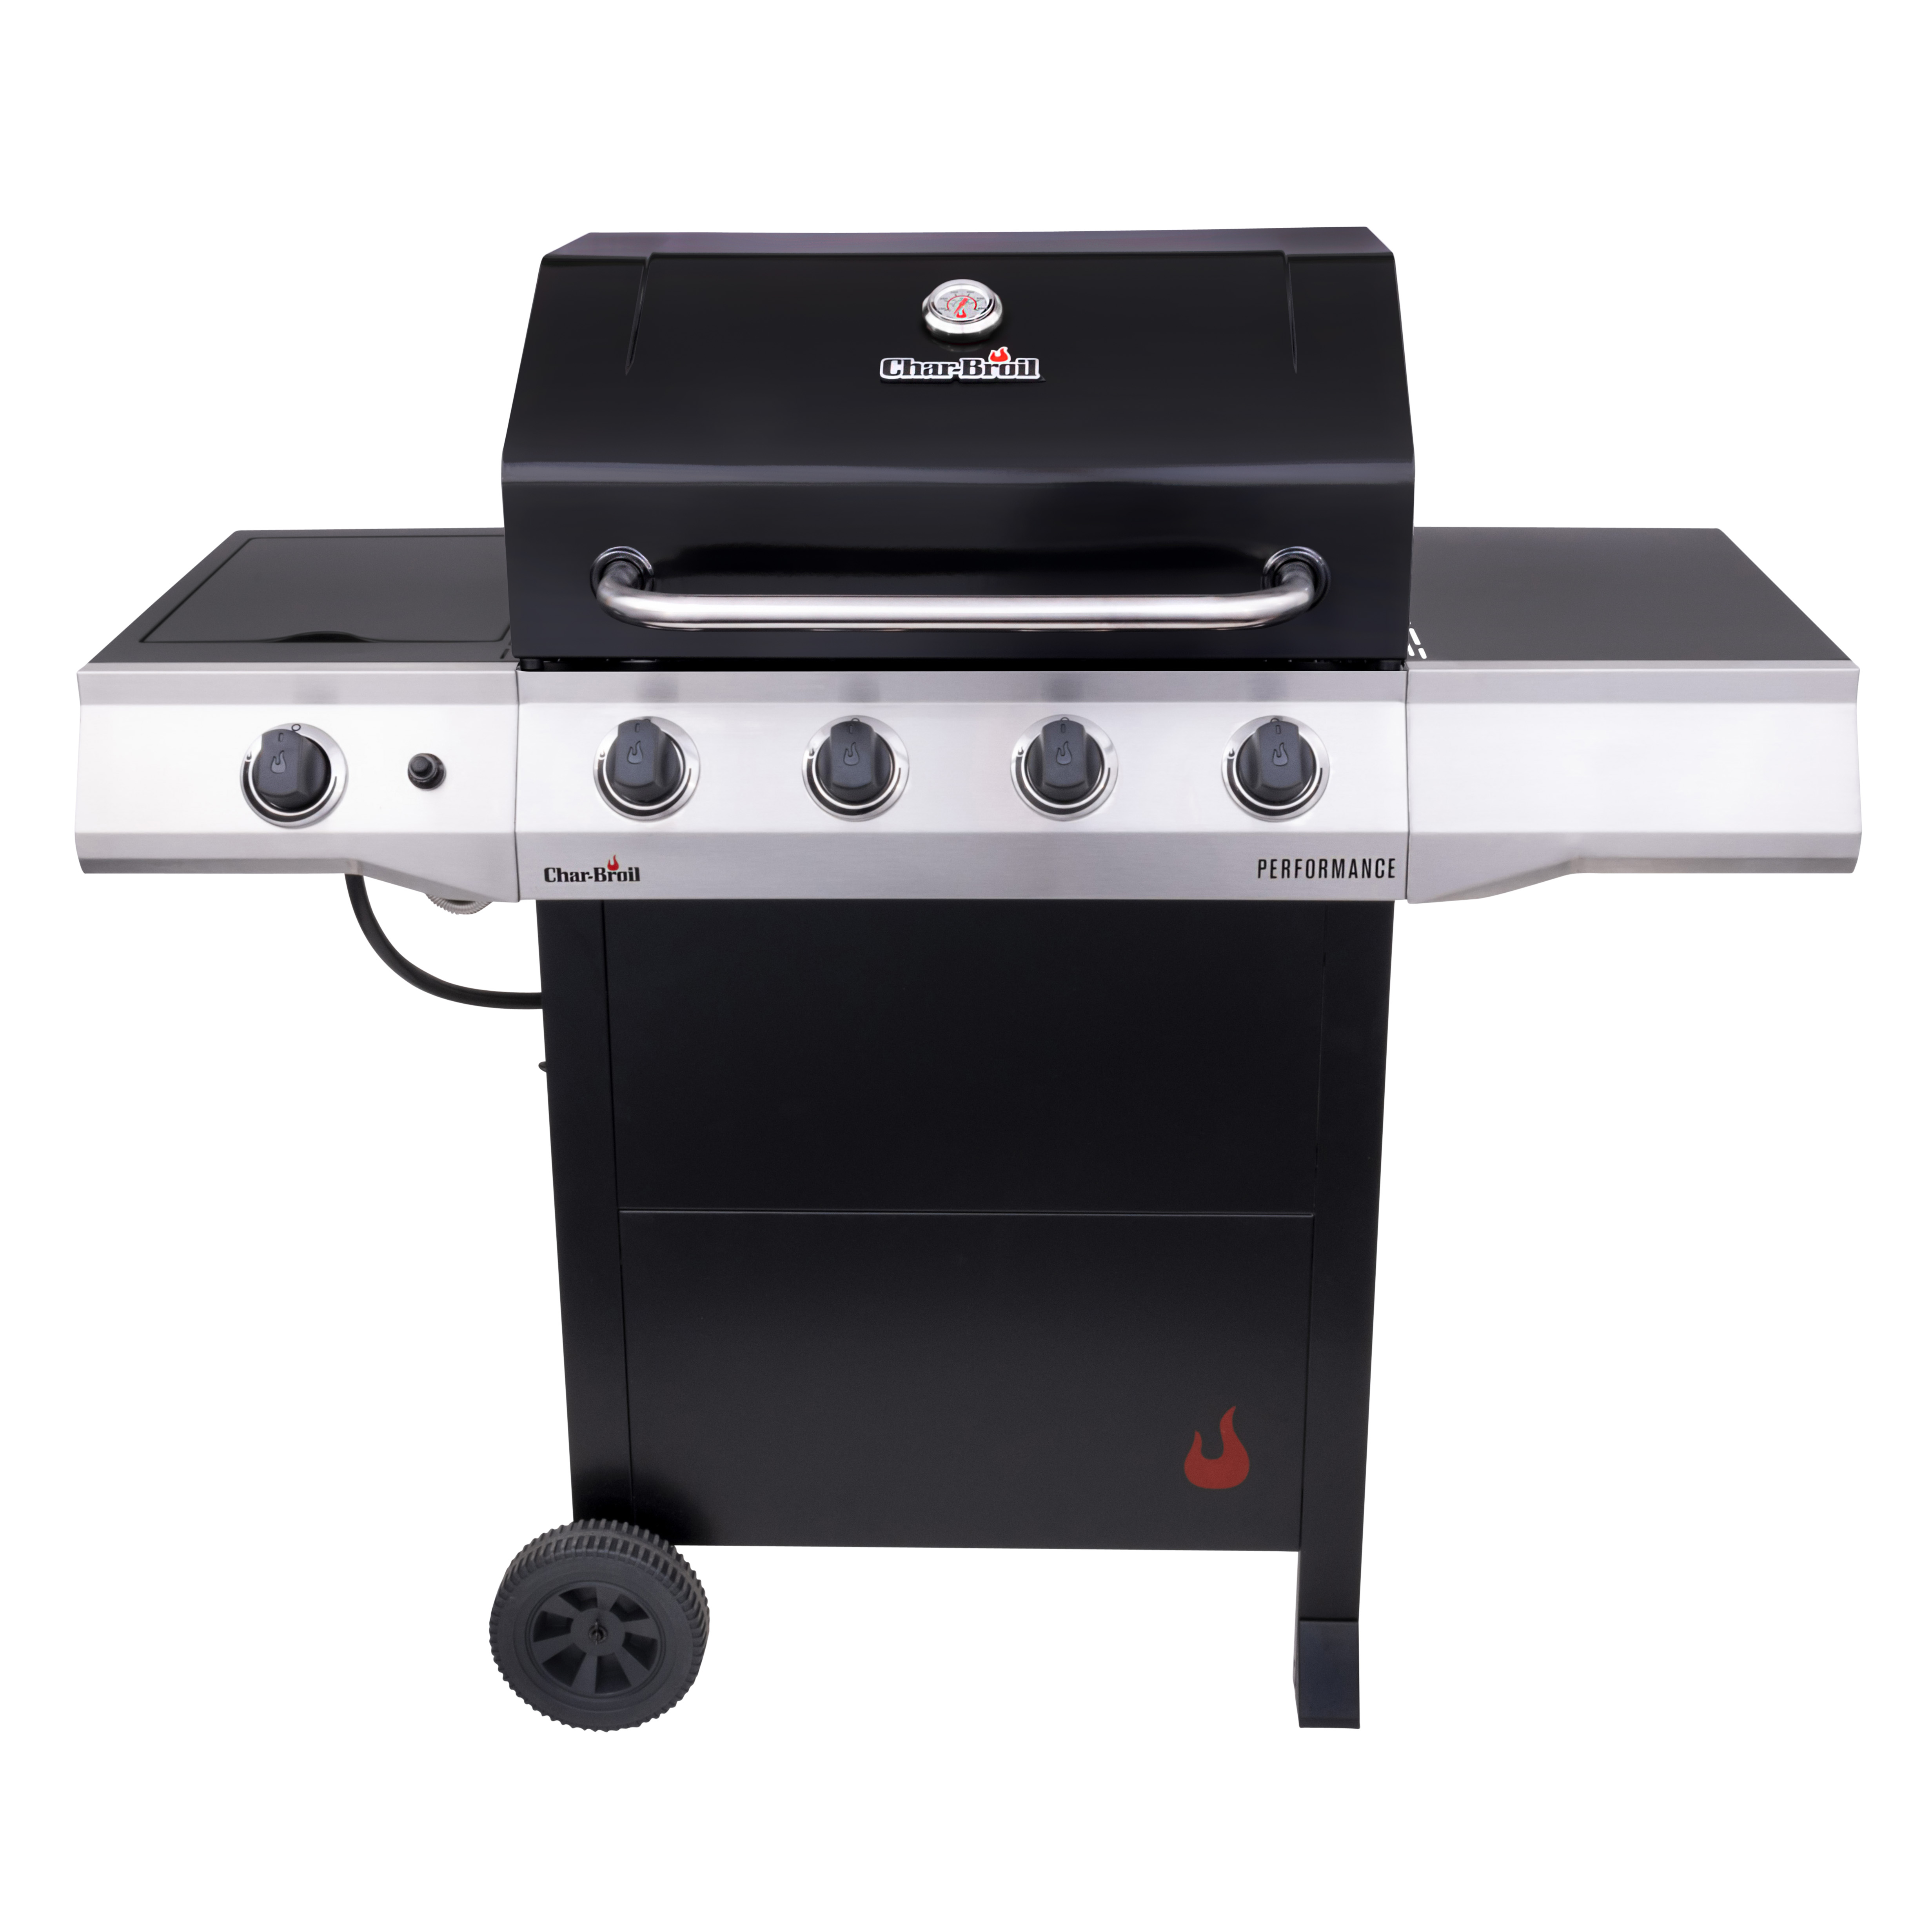 Char-Broil Performance 4-Burner Liquid Propane, Cart-Style Outdoor Gas Grill- Black - image 1 of 9